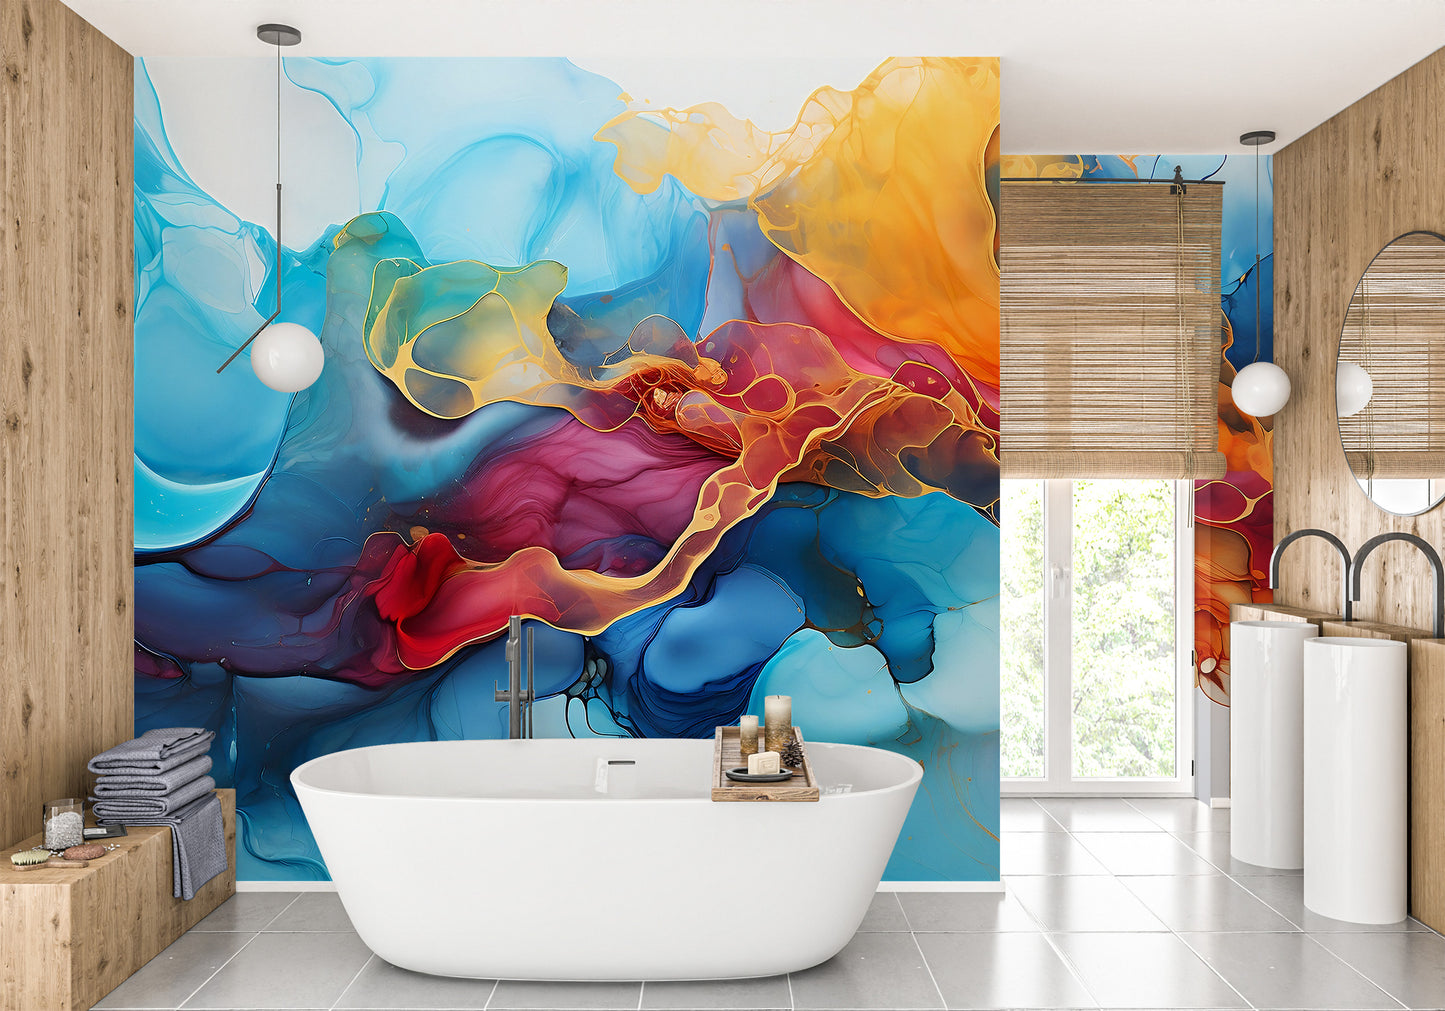 Peel & Stick Wall Art with Vibrant Blue and Orange Paint Design